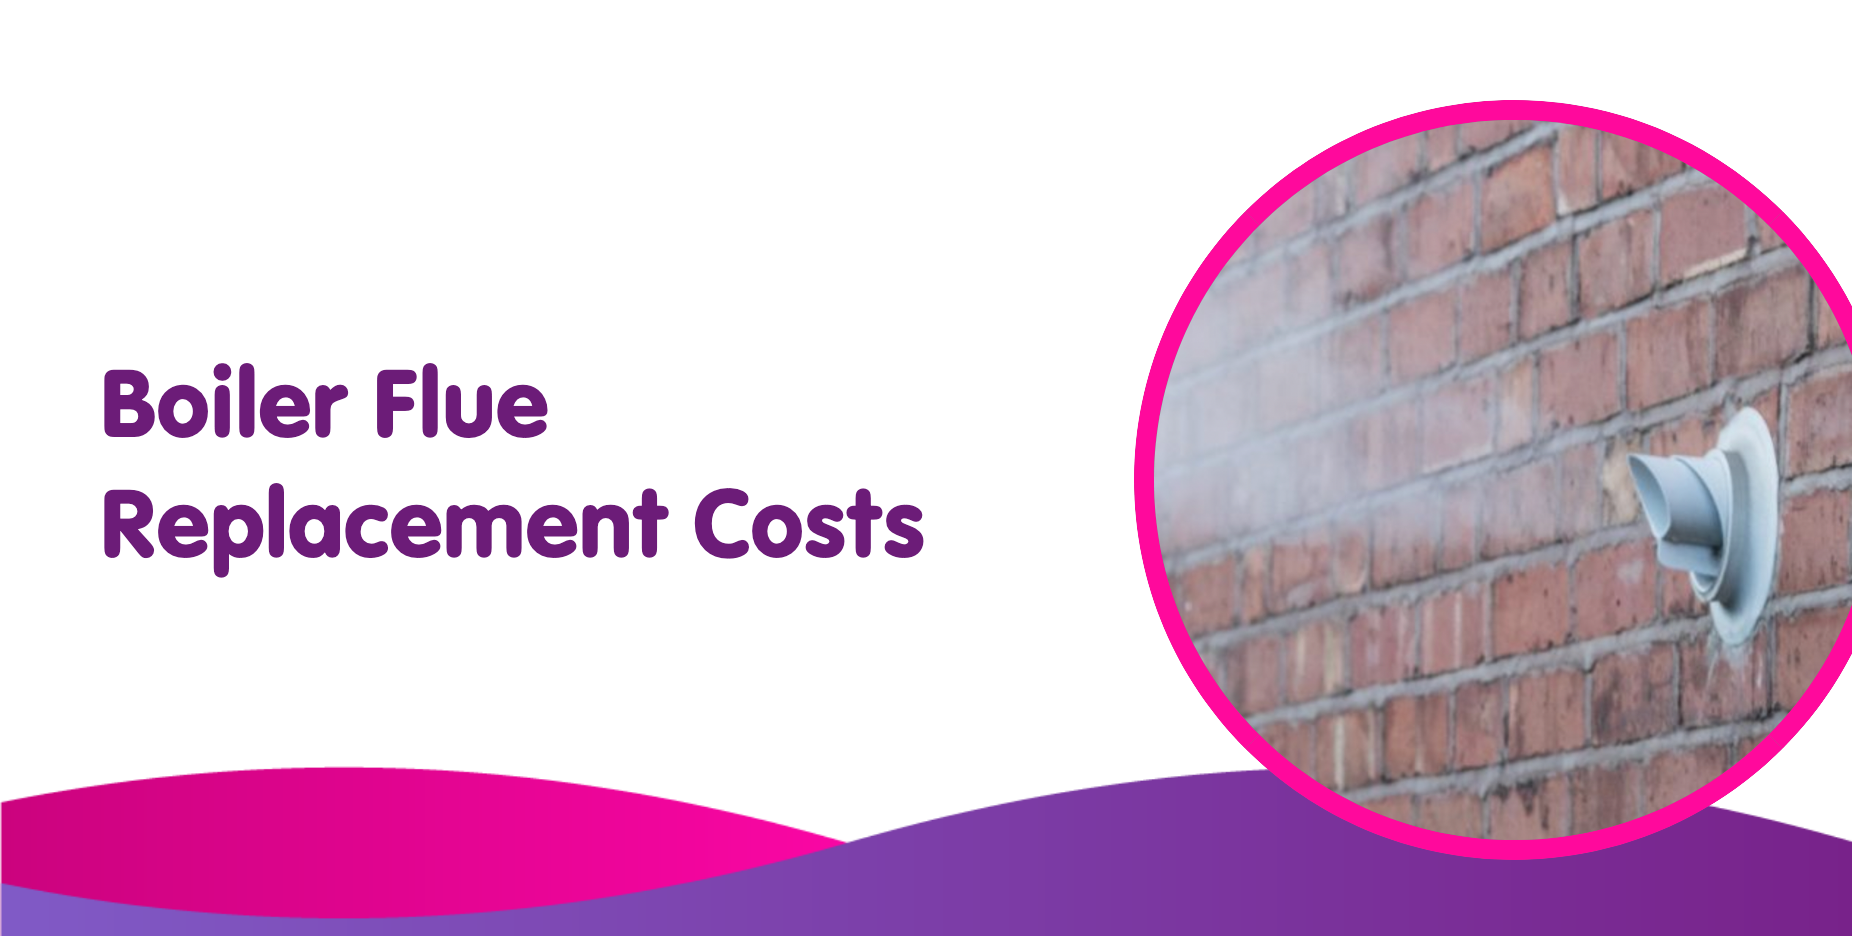 Boiler Flue Replacement Cost, Prices & More